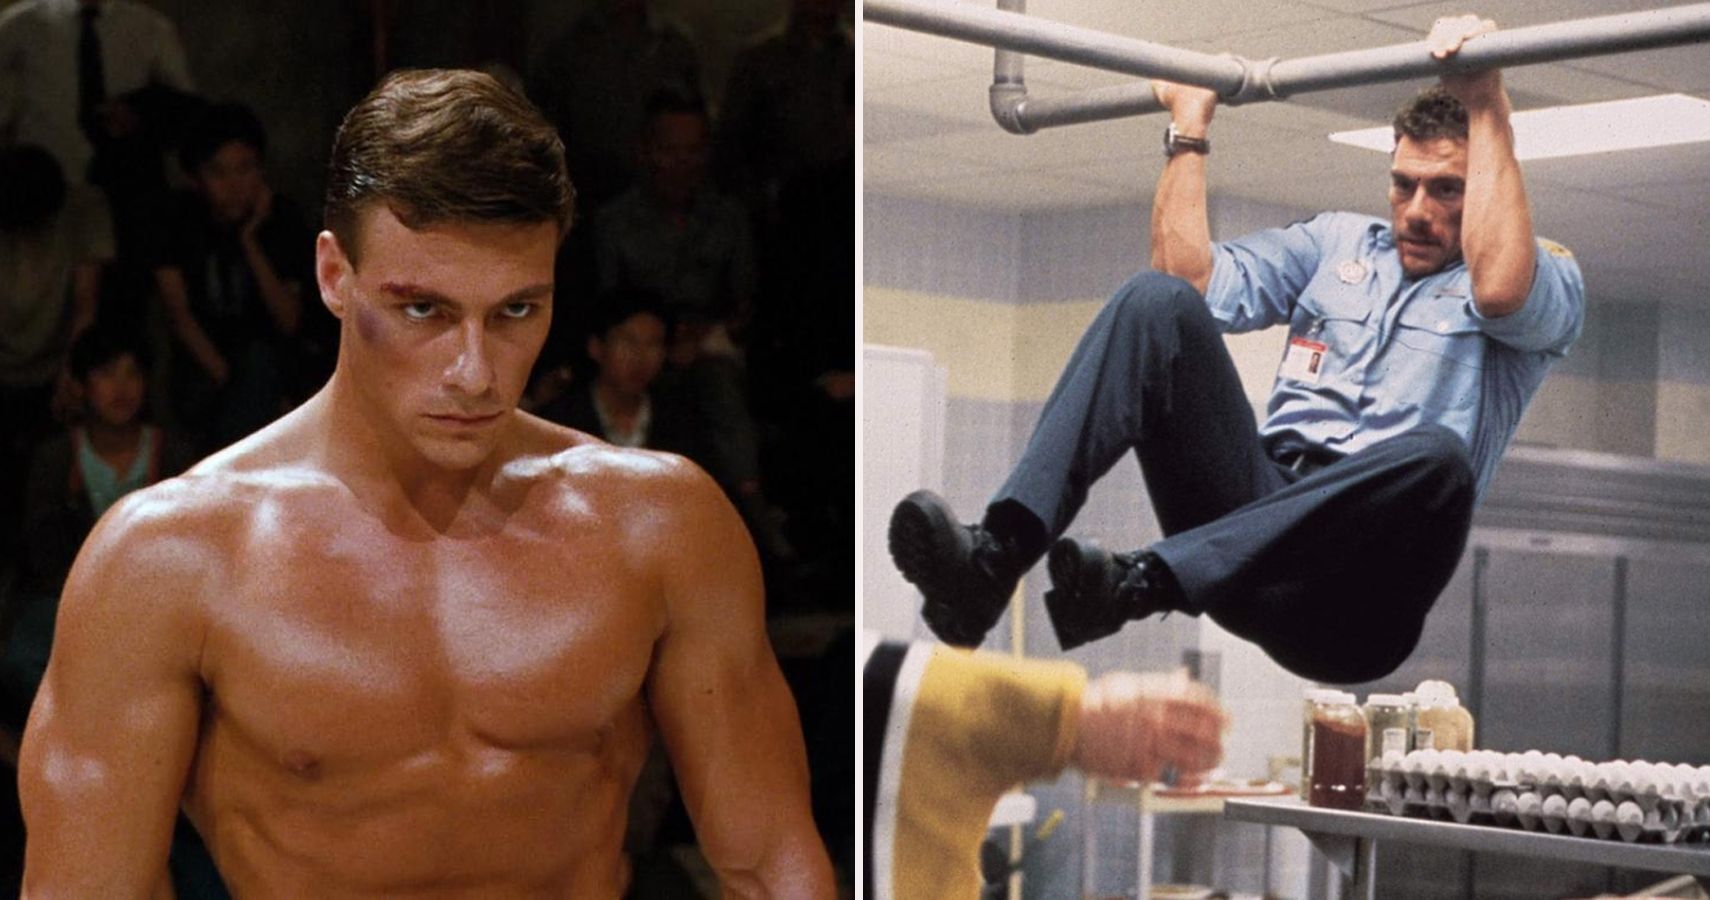 Most Jean-Claude Van Damme movies are filled with crazy stunts